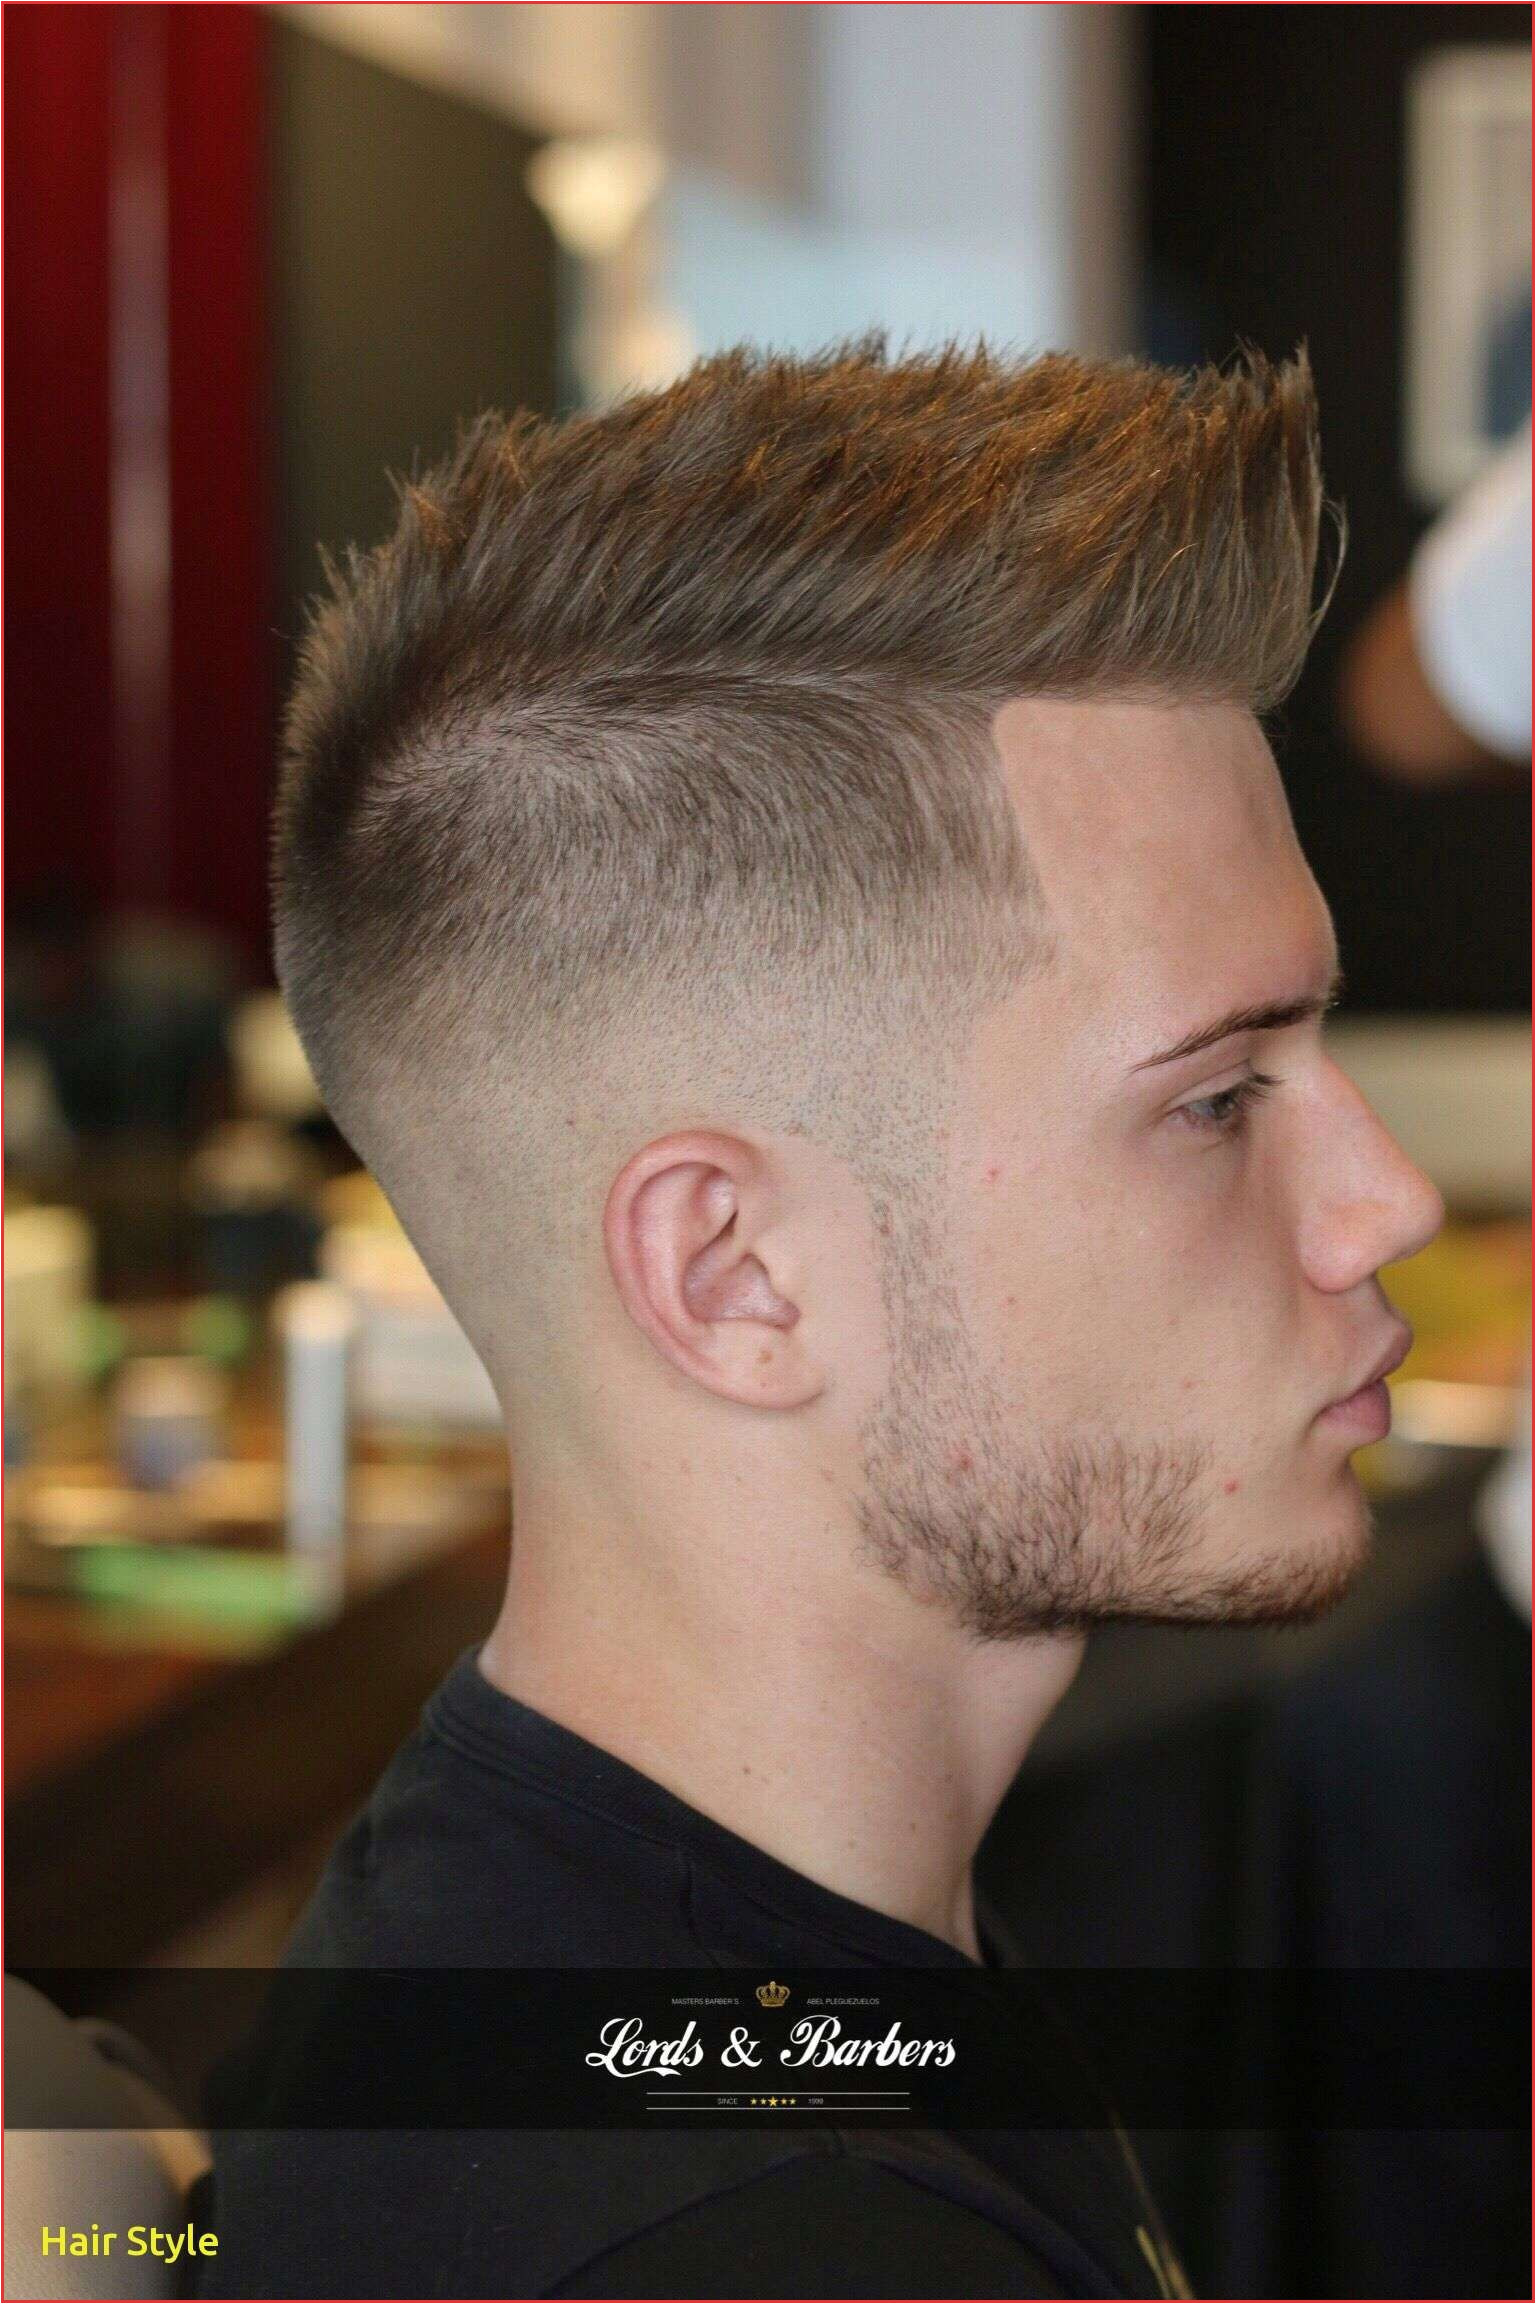 Mens Haircuts 2019 Inspirational Temp Fade Hairstyles Male Hair Styles Best Hairstyles Men 0d Image